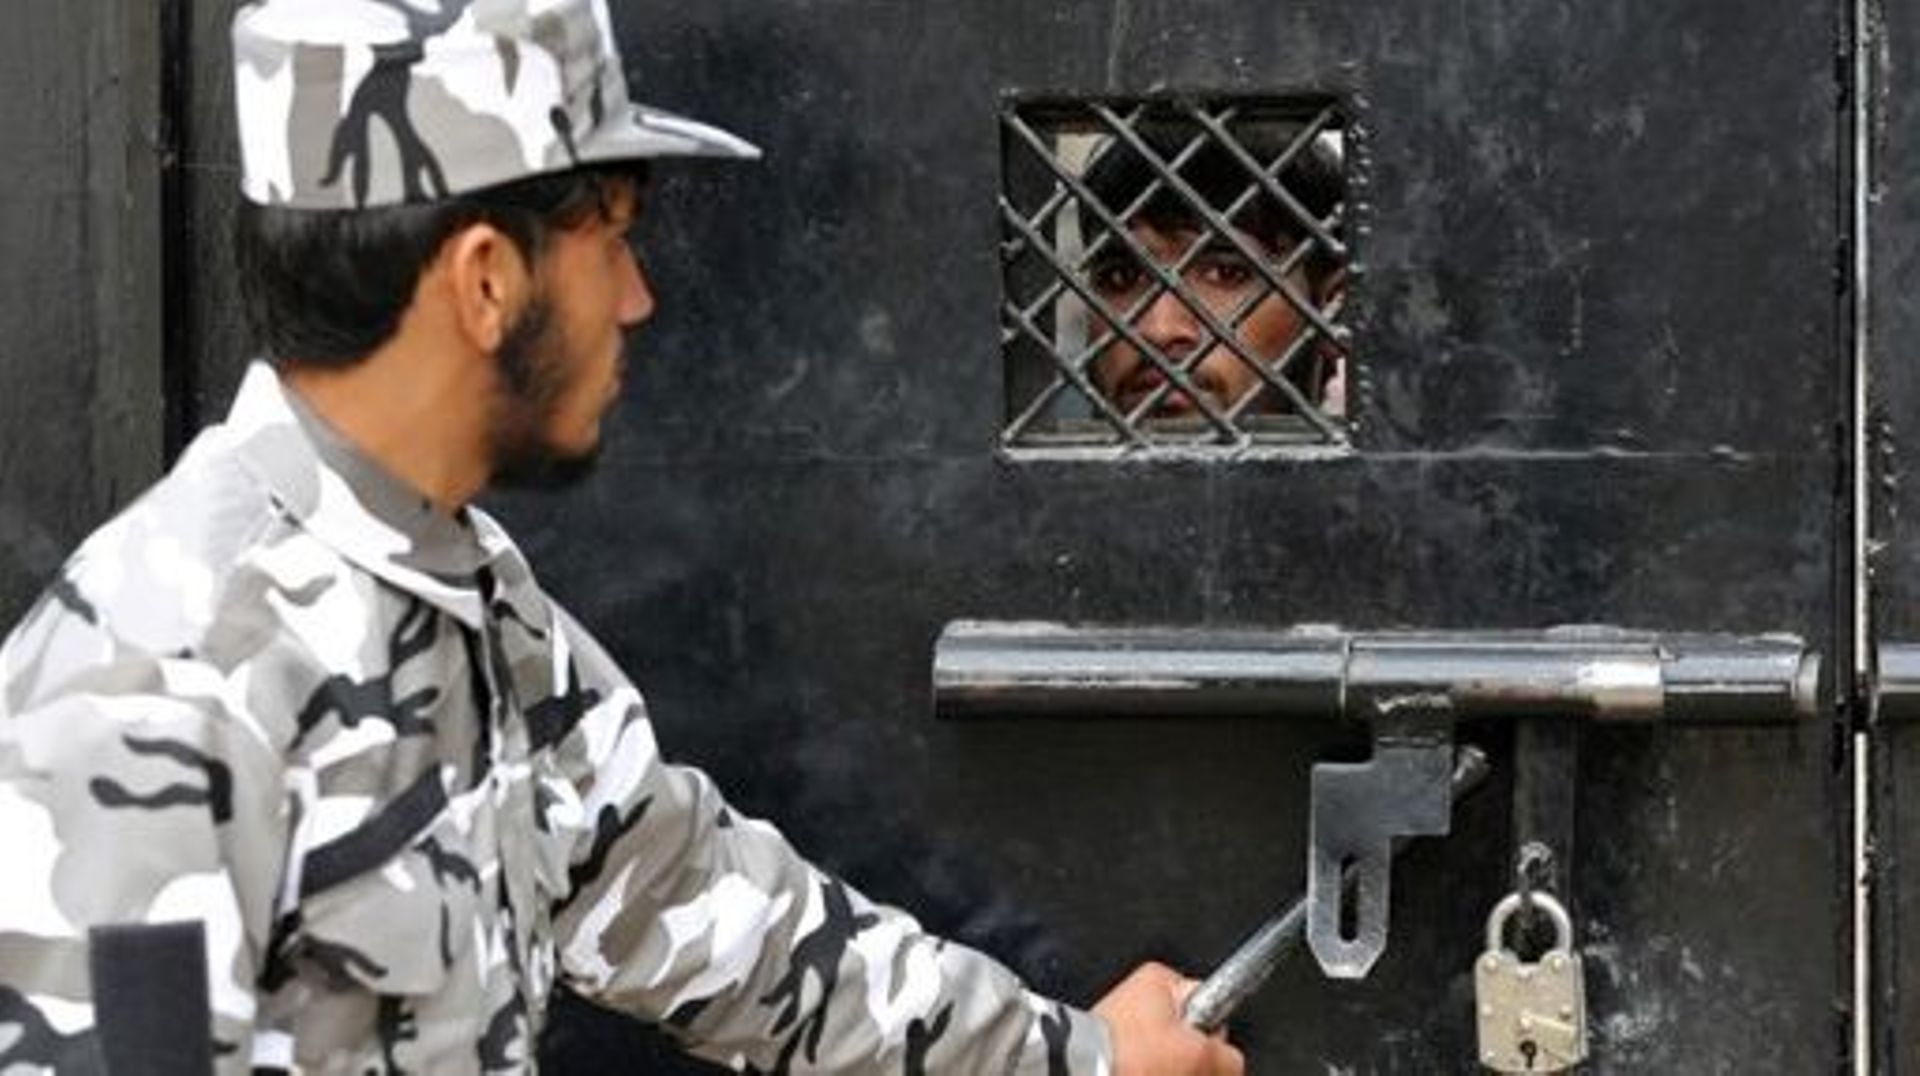 A member of Taliban security force stands guard as an inmate watches from behind the closed gate of a prison in Jalalabad on January 19, 2023.  Shafiullah KAKAR / AFP